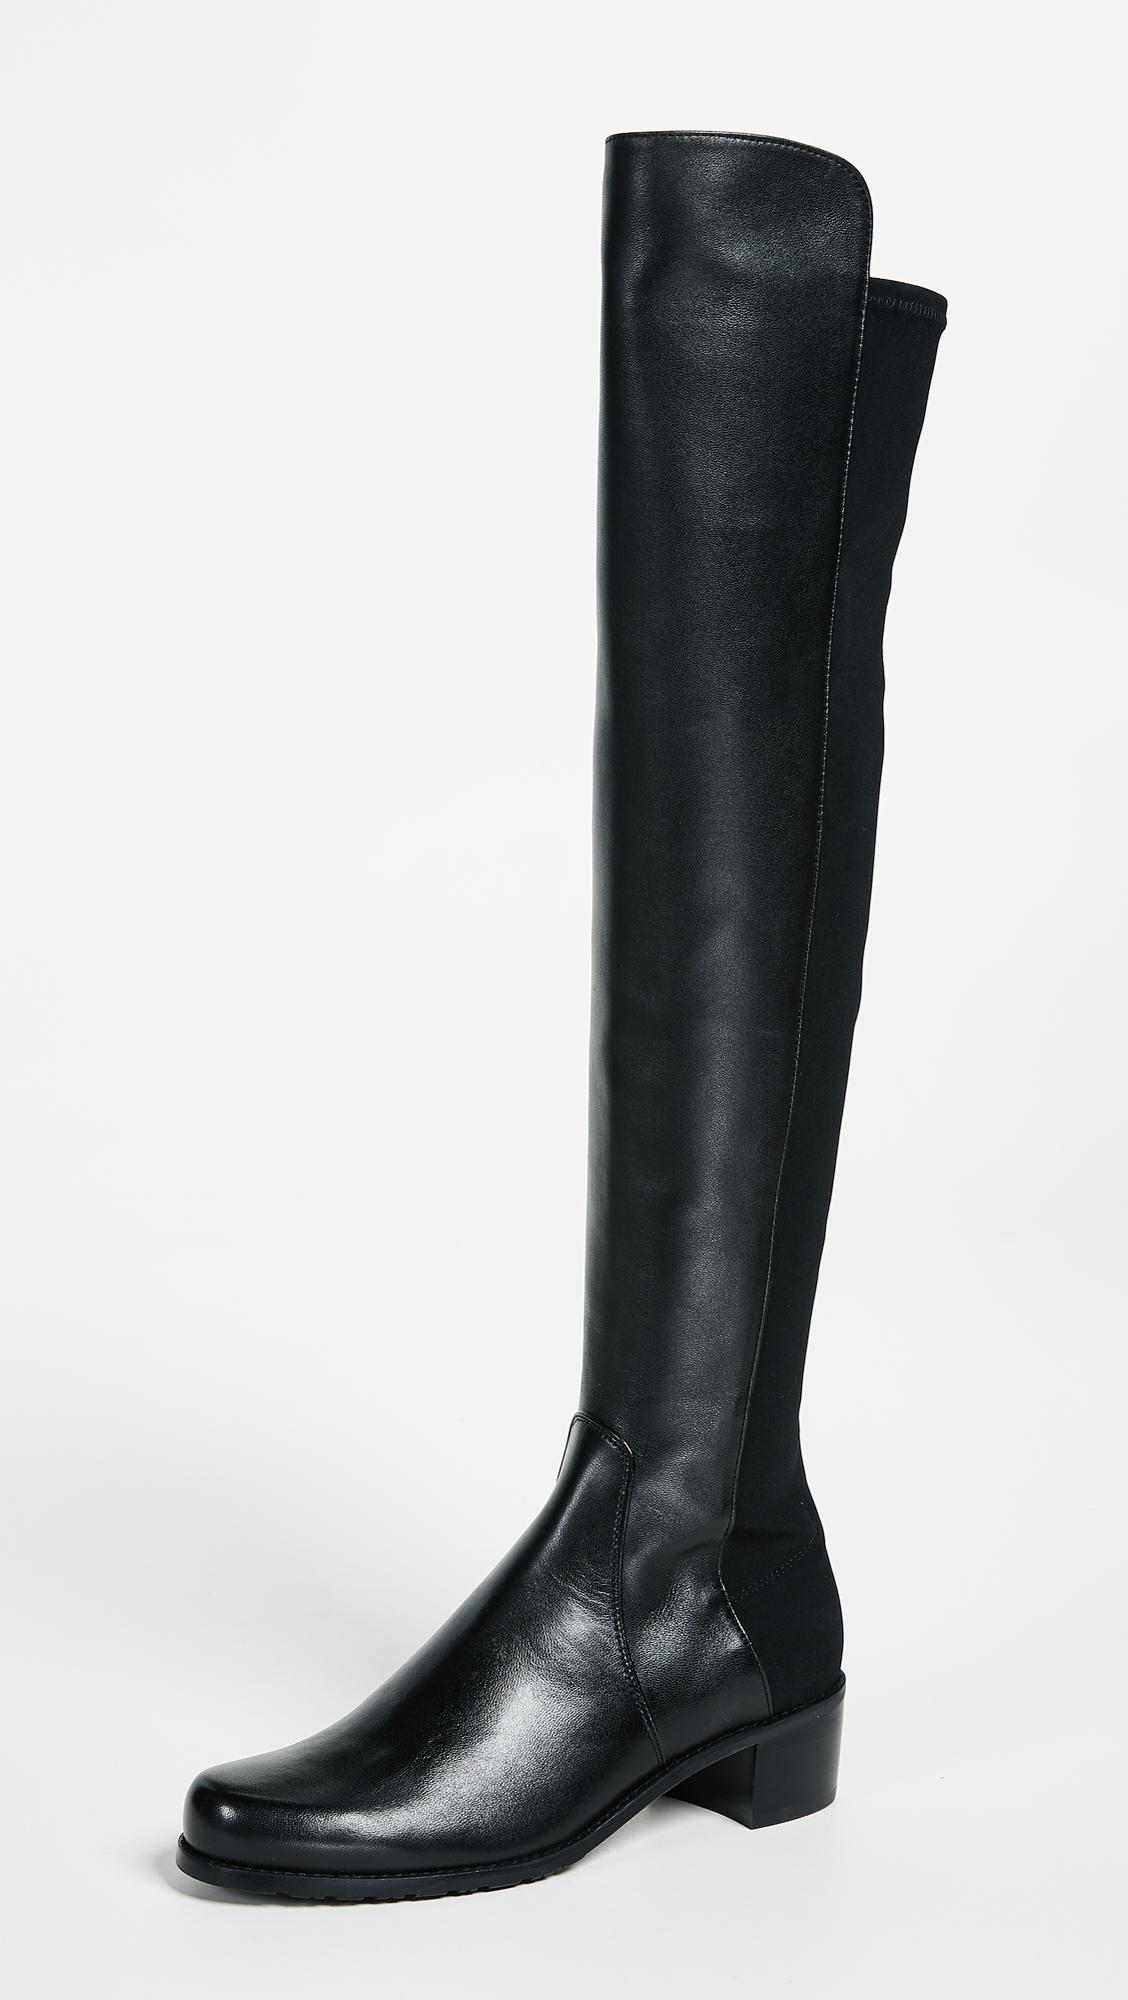 Stuart Weitzman Leather Reserve Tall Boots in Black Leather (Black ...